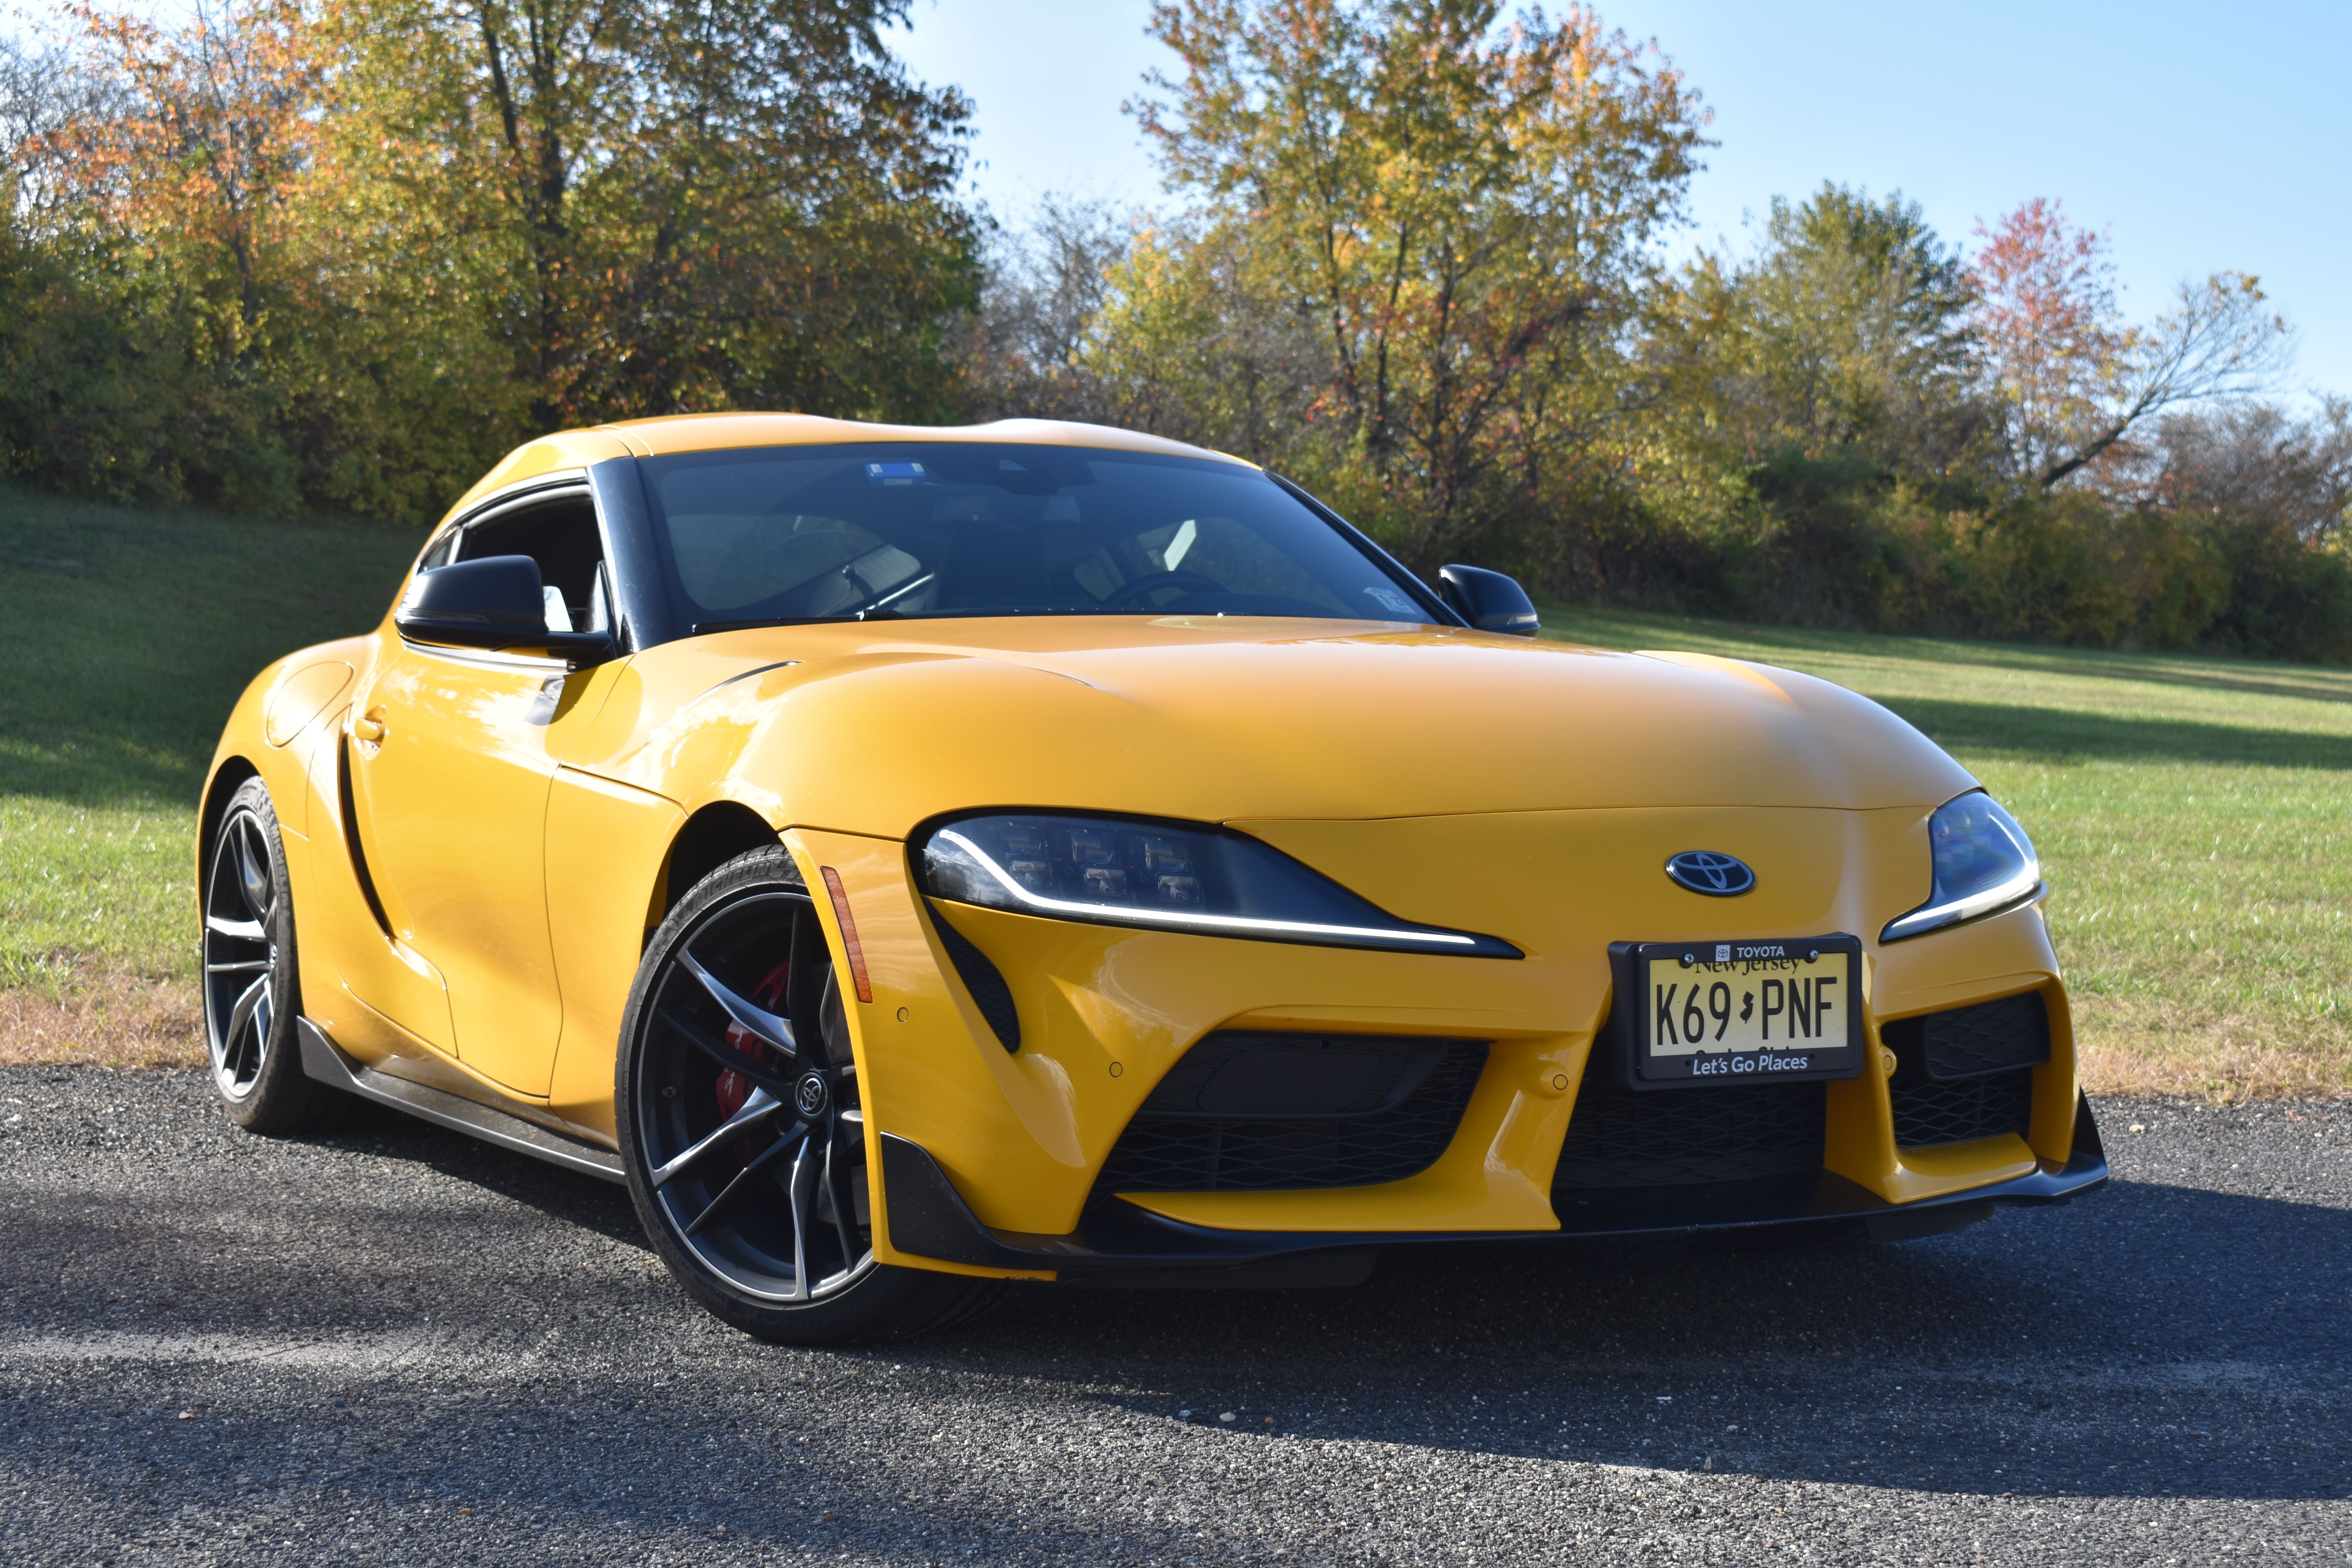 2022 Supra 3.0L GR Review: Terrific Sports Car With An Image Problem